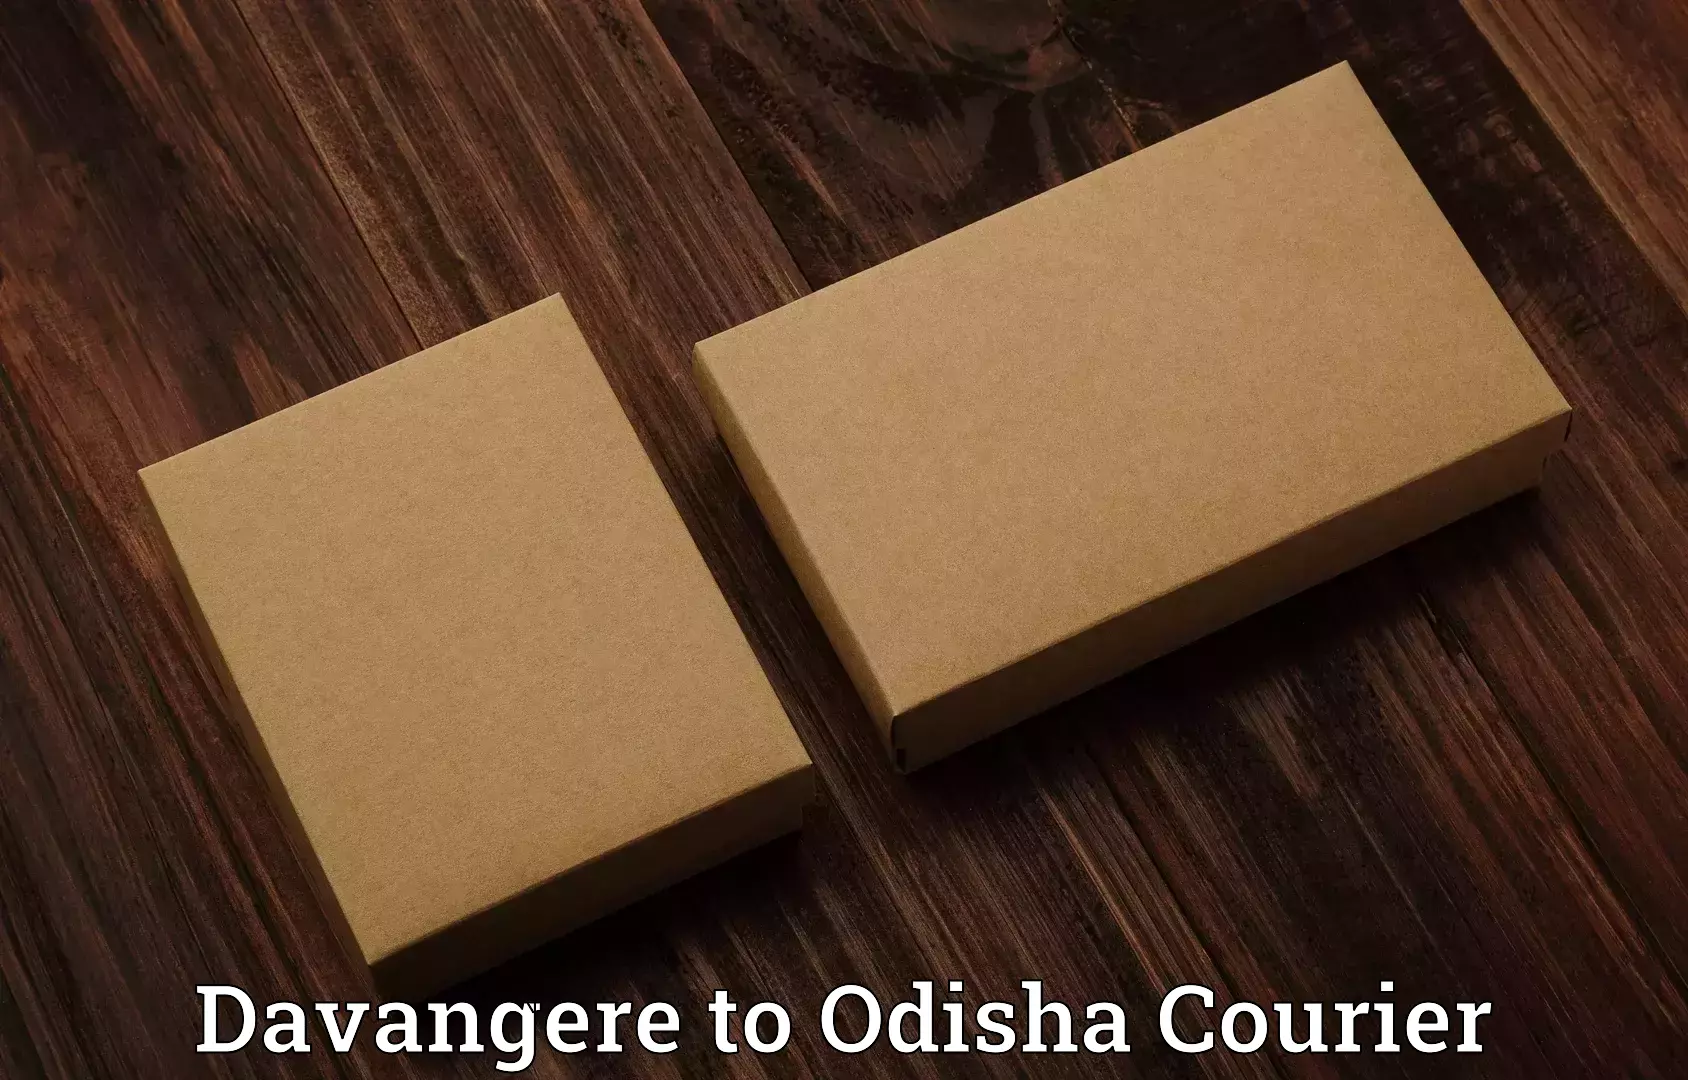 Instant baggage transport quote Davangere to Bhubaneswar